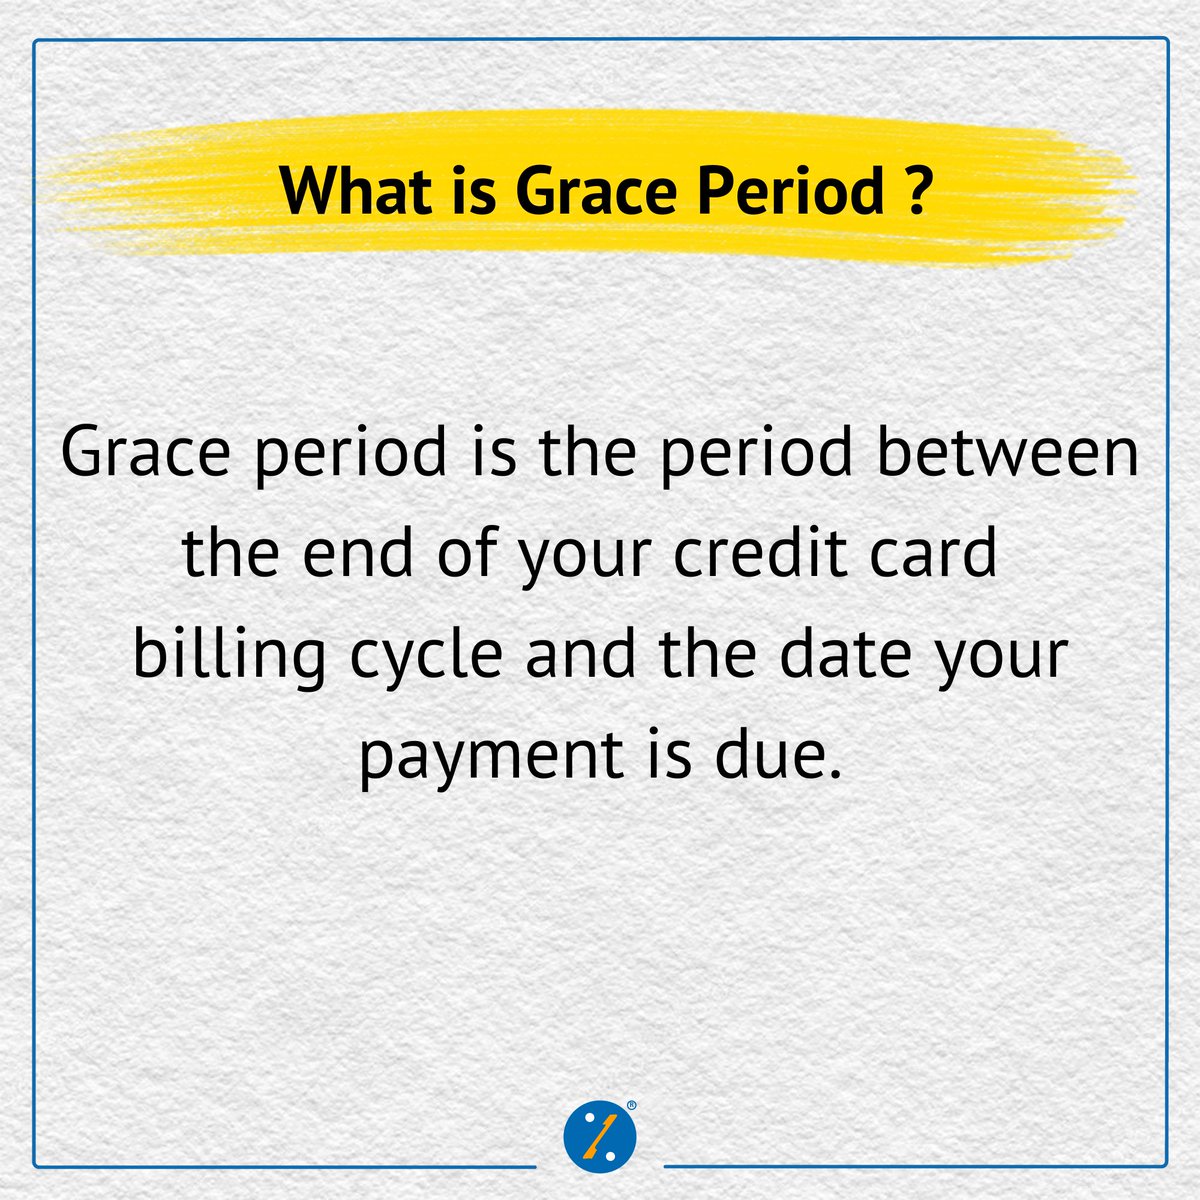 #personalfinance

When you pay your #creditcard bill, you must have come across the term 'Grace Period'!

This is what it means!

#SundayFunday #MothersDay #shoppingonline